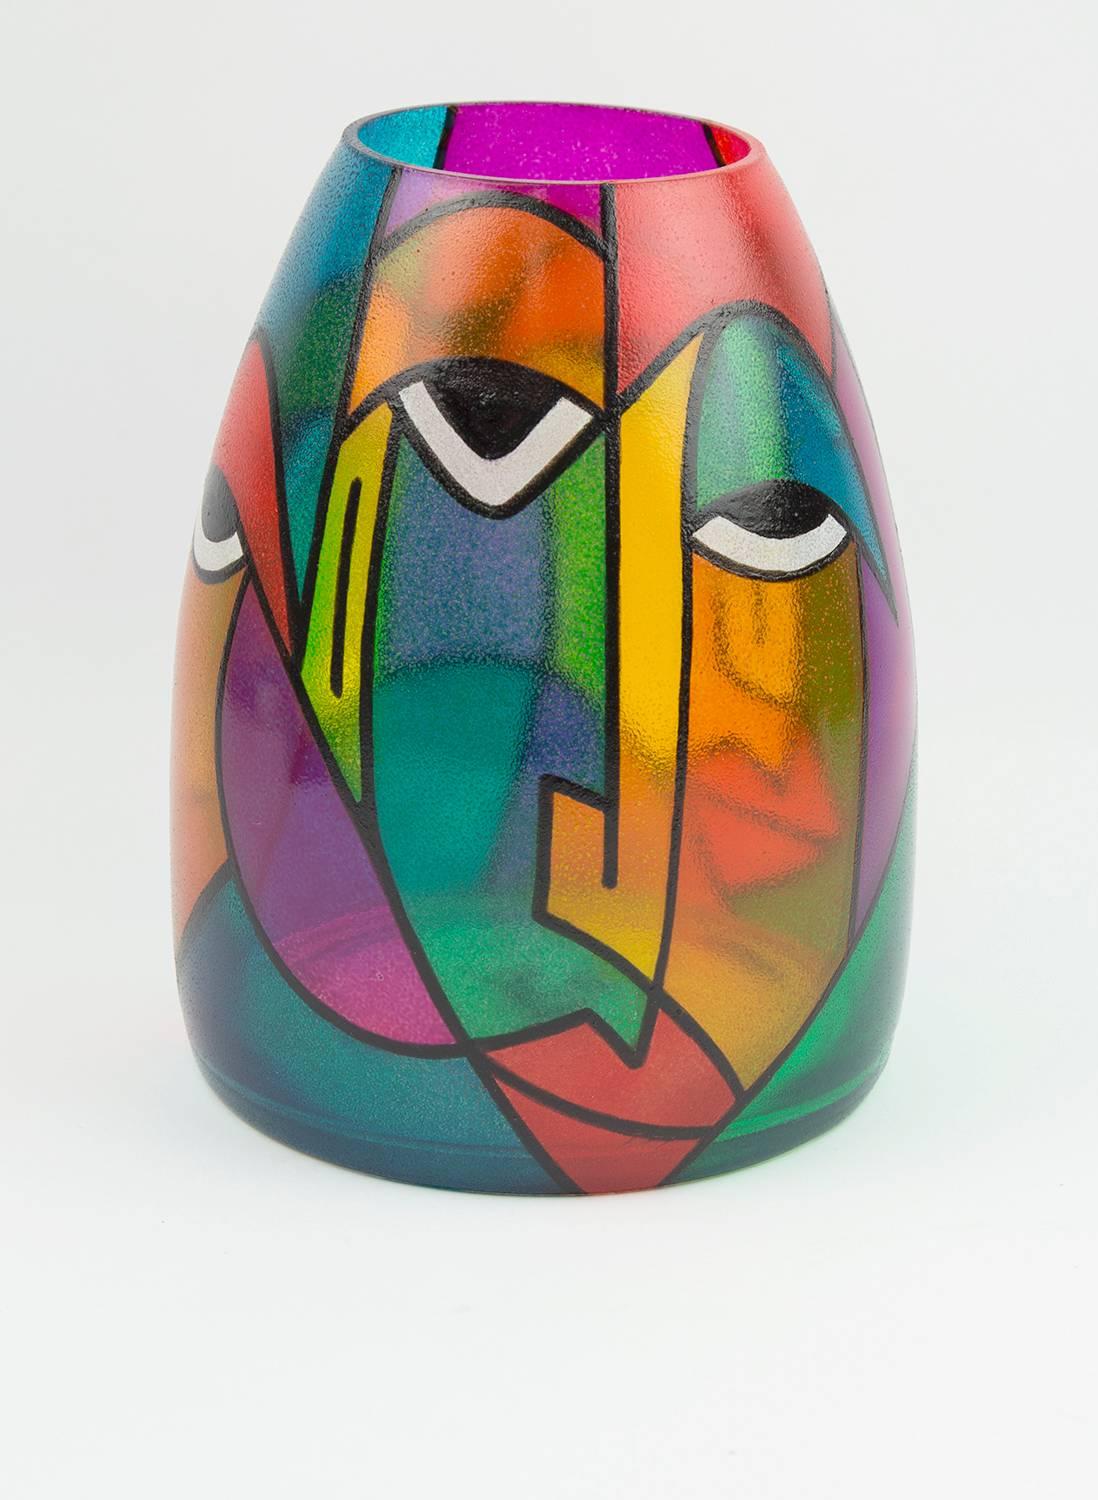 Rare and Individual art glass vase with very striking and eye catching multi-dimensional face abstract Picasso design shaped The design, Murano inspired are created by this amazing artist, the glass has an outer textured finish to the glass; signed